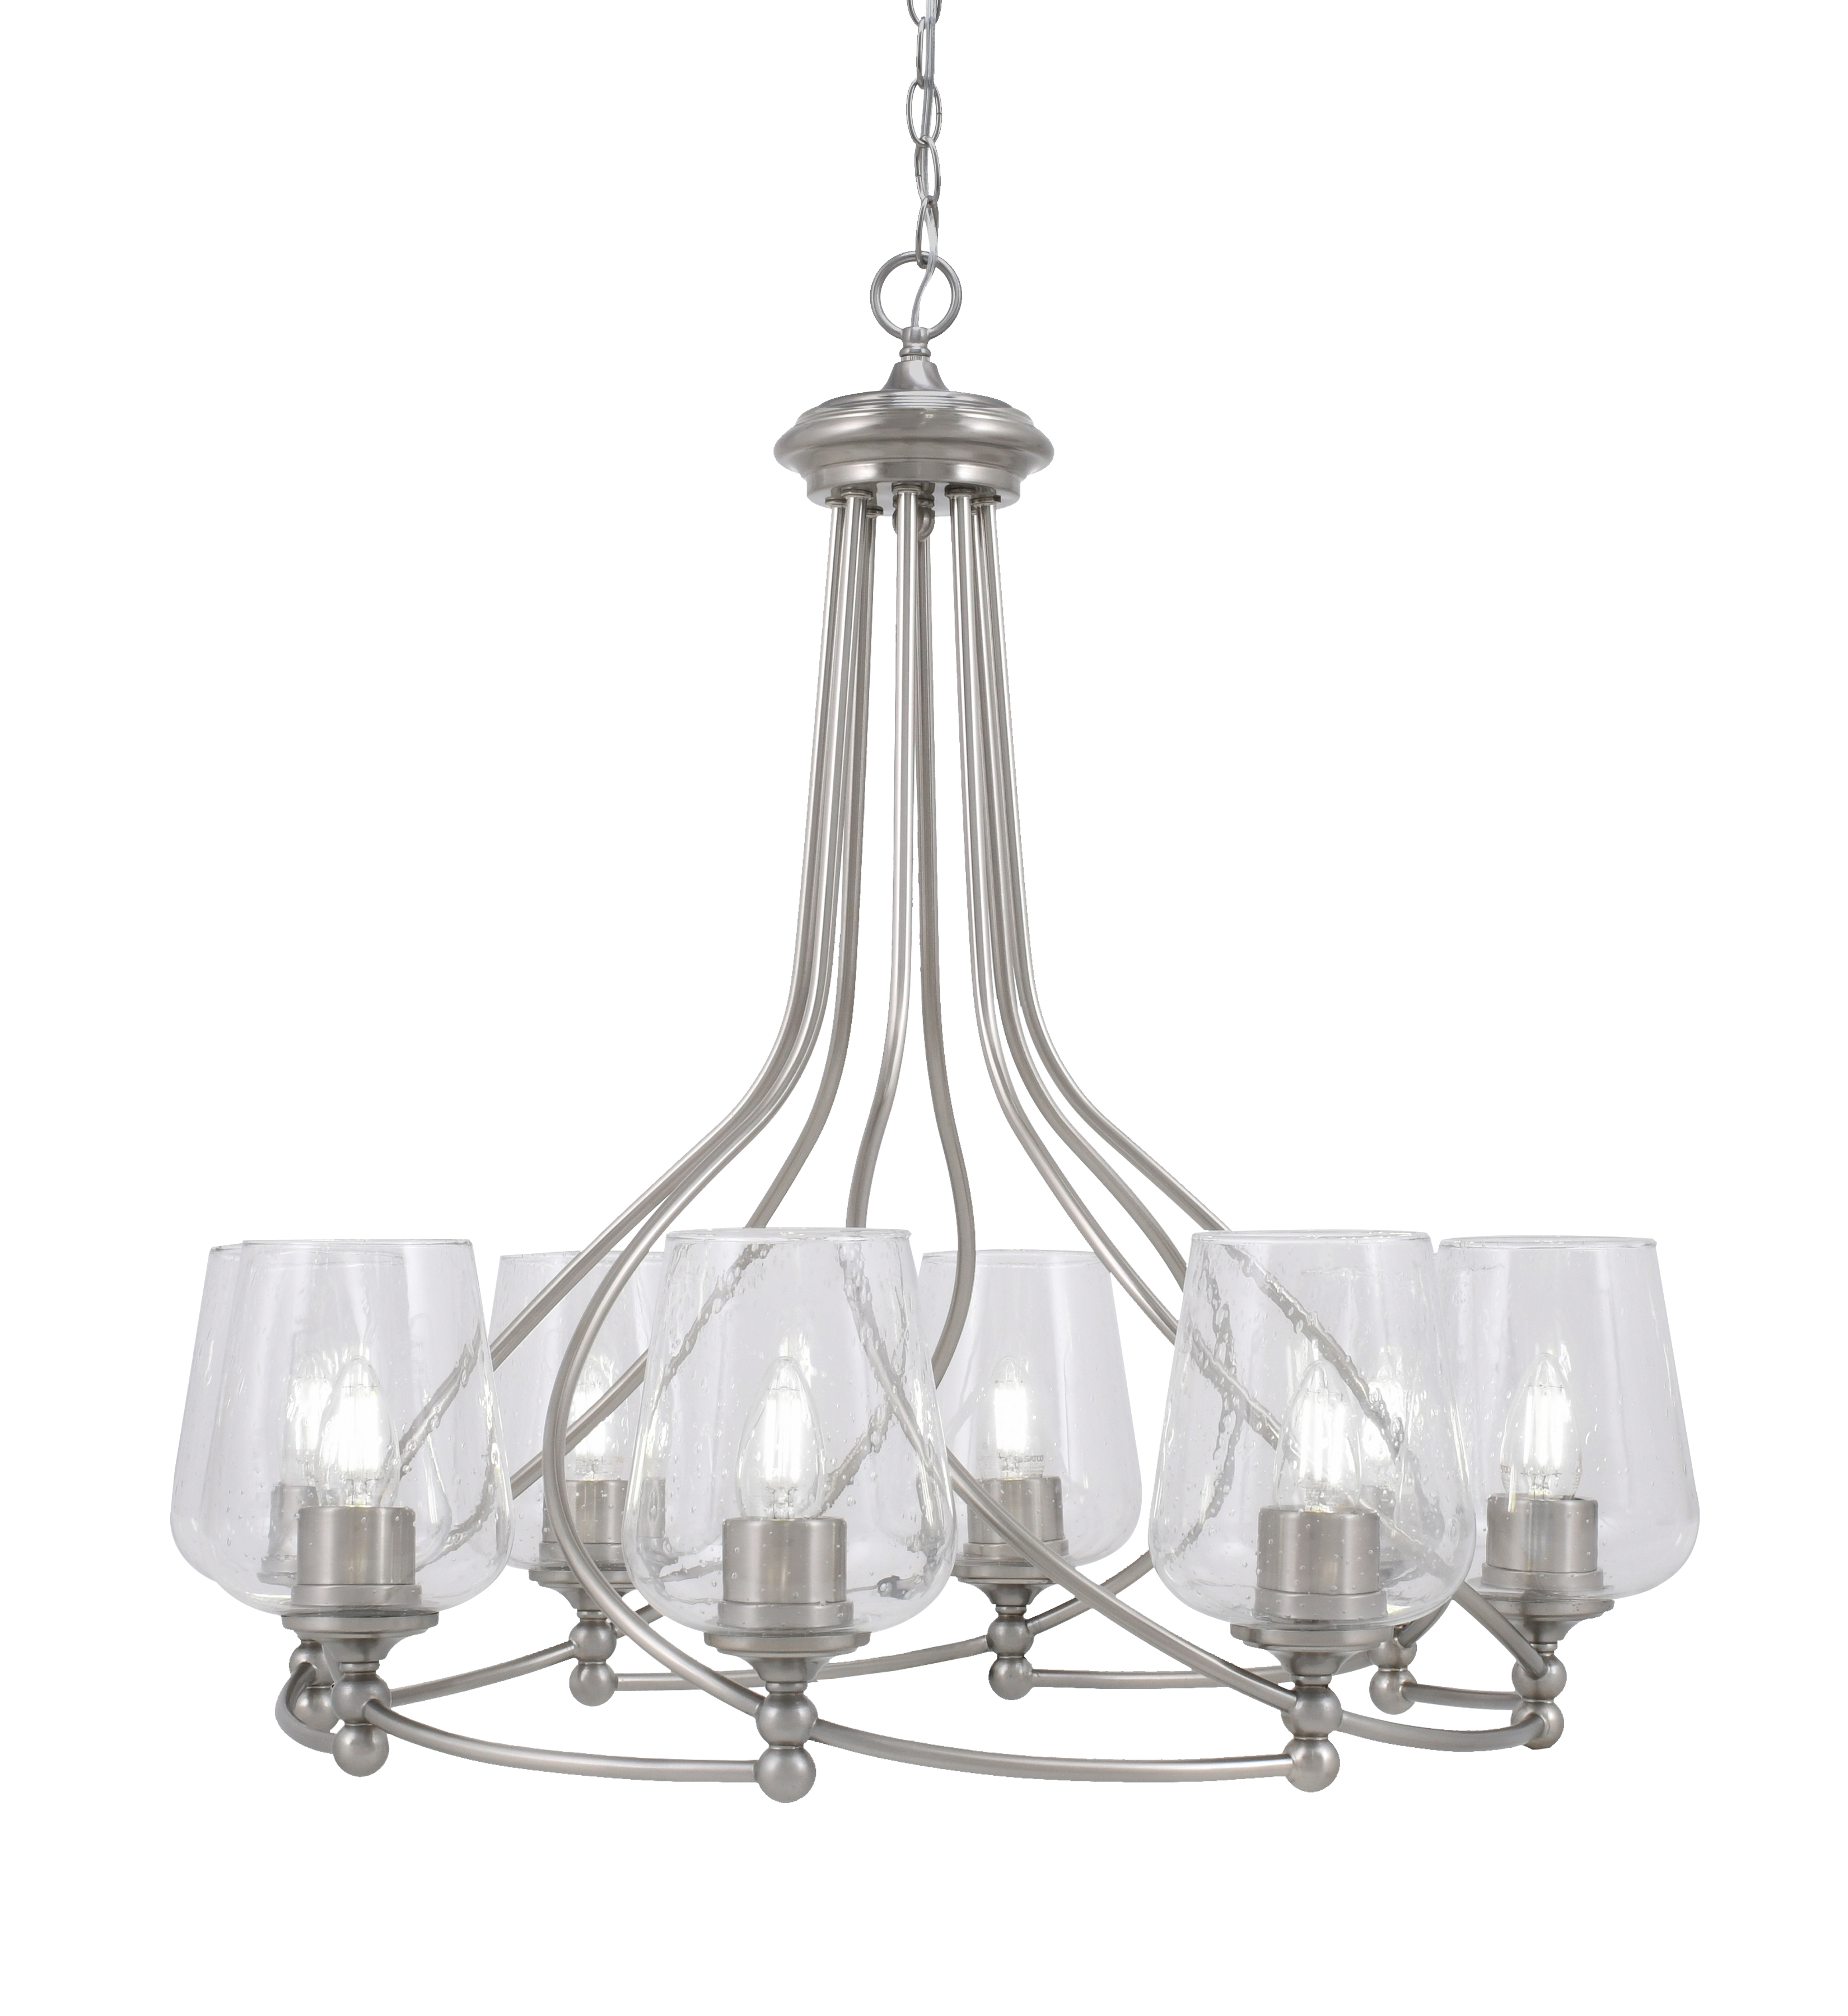 Toltec Lighting 908-BN-210 Capri Uplight, 8 Light, Chandelier Shown In Brushed Nickel Finish With 5" Clear Bubble Glass